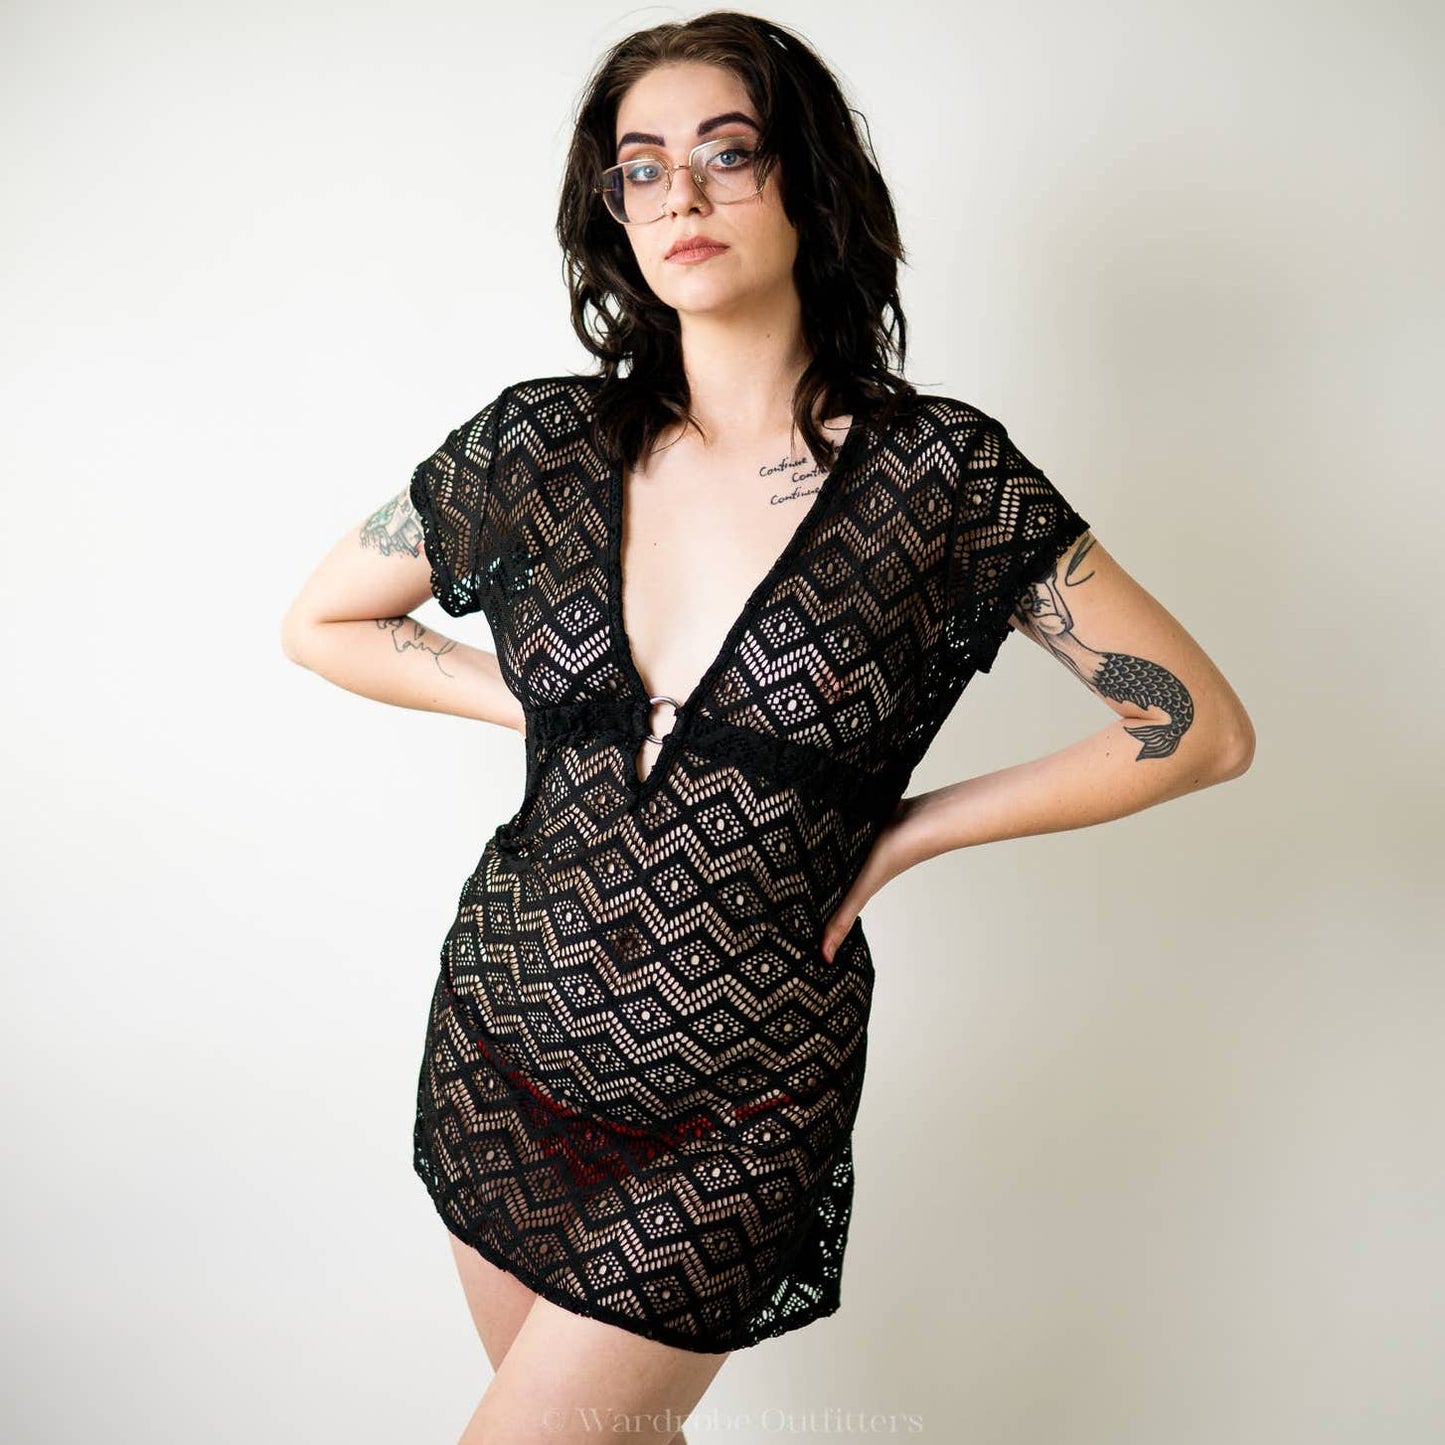 Catalina Black Mesh Lace Swimsuit Cover Up Dress